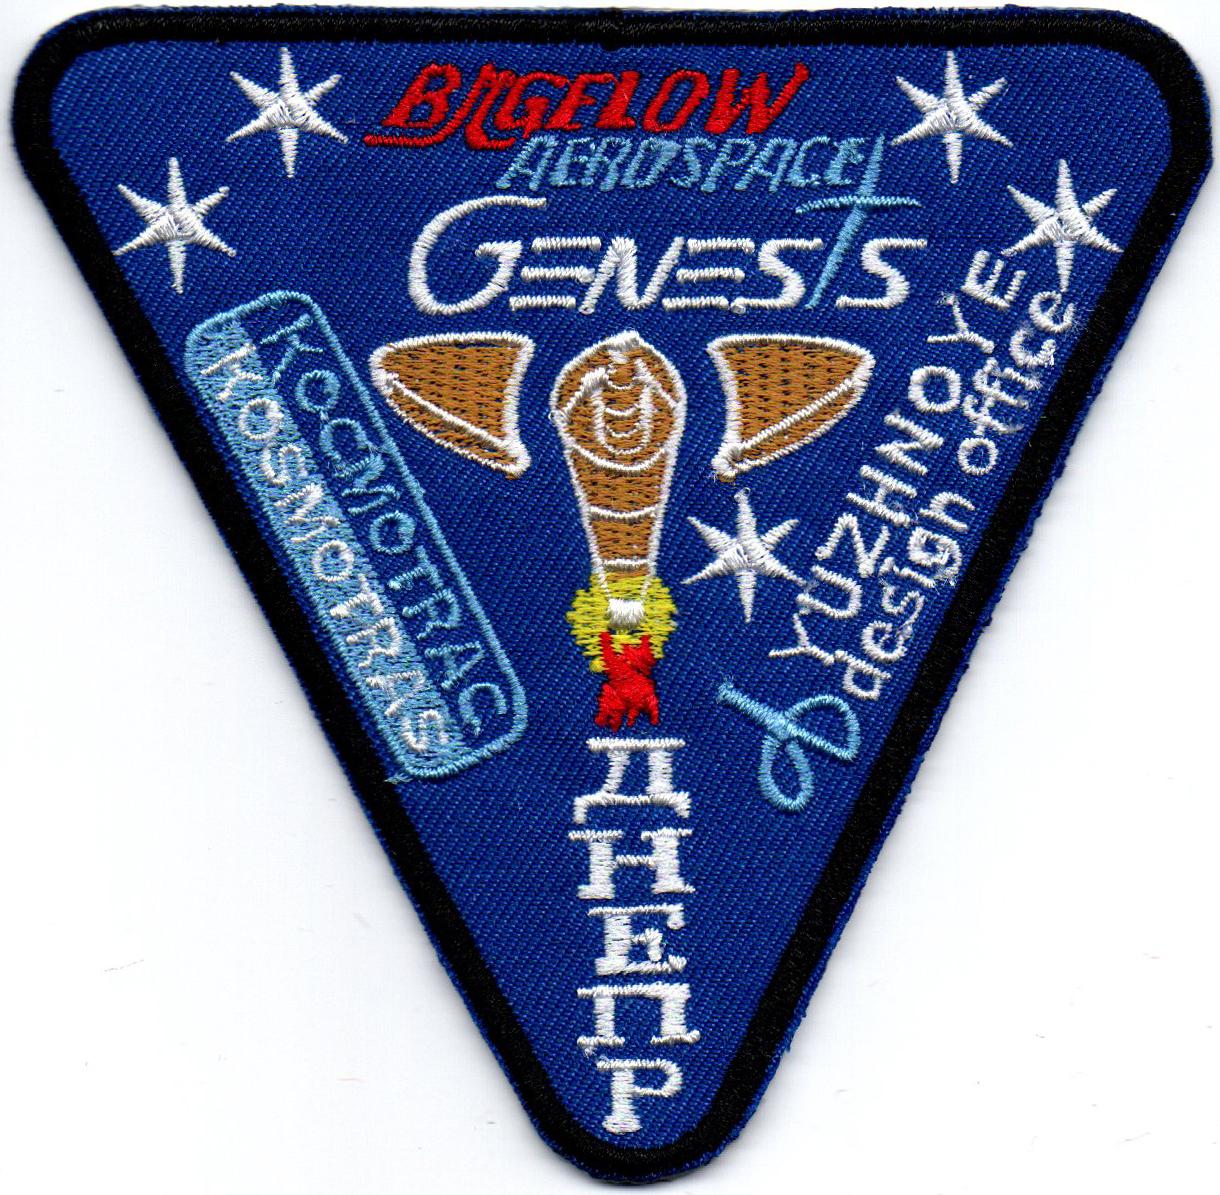 Primary image for Human Space Flights Bigelow Expandable Activity Module BEAM Genesis I Patch